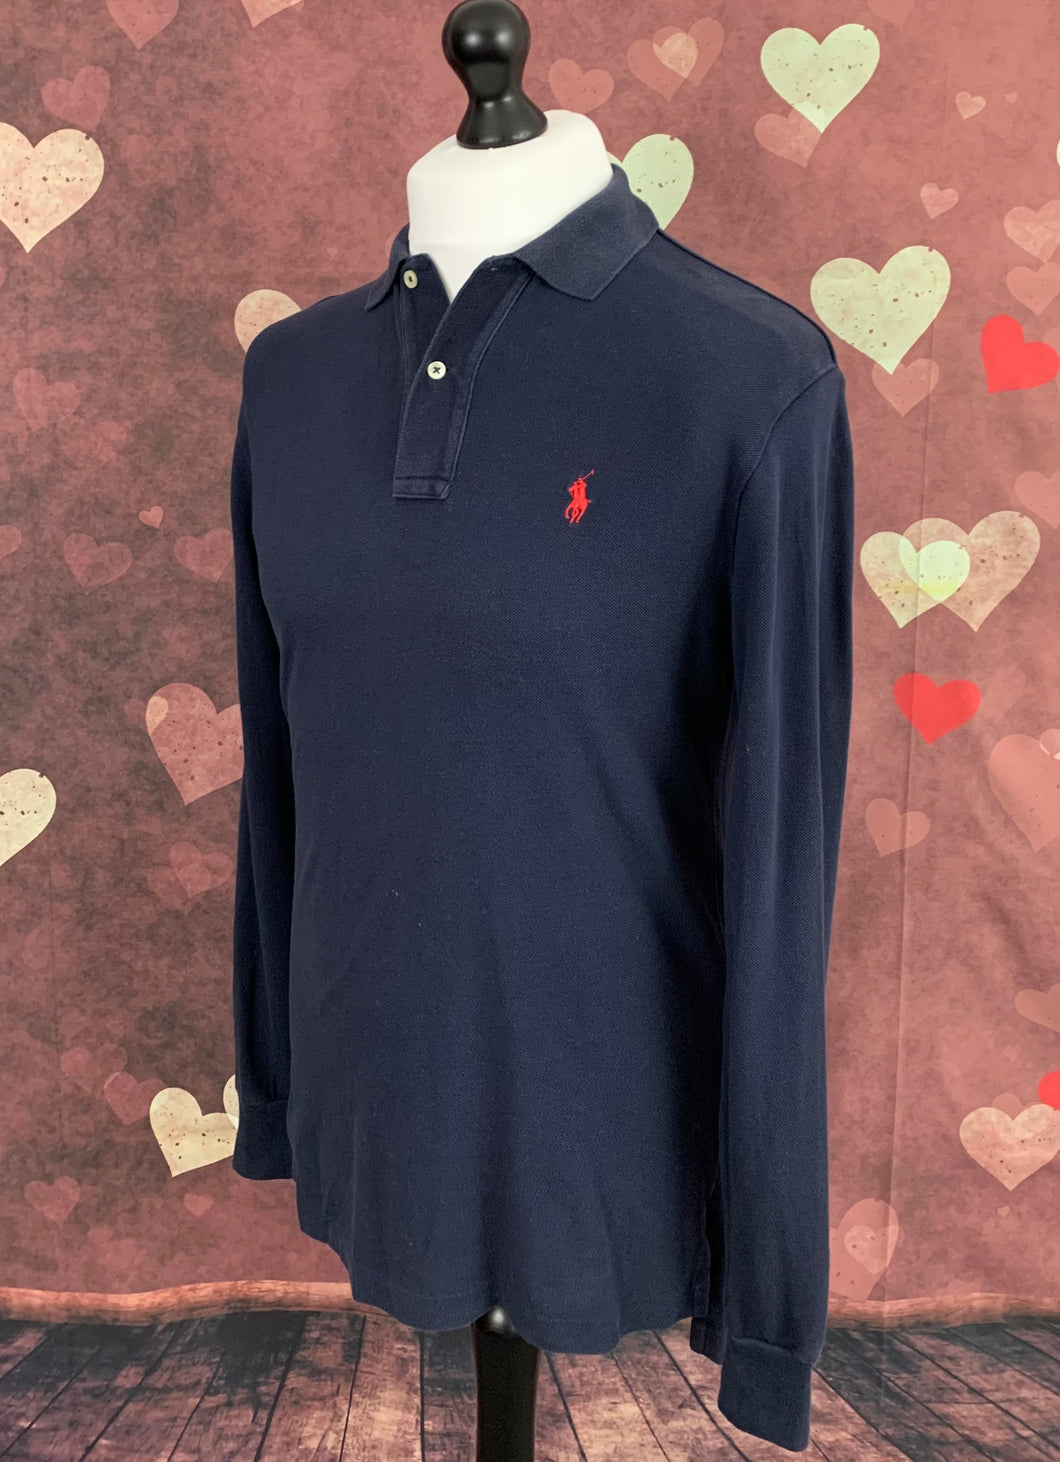 POLO RALPH LAUREN Mens Navy Blue Long Sleeved POLO SHIRT Size S Small